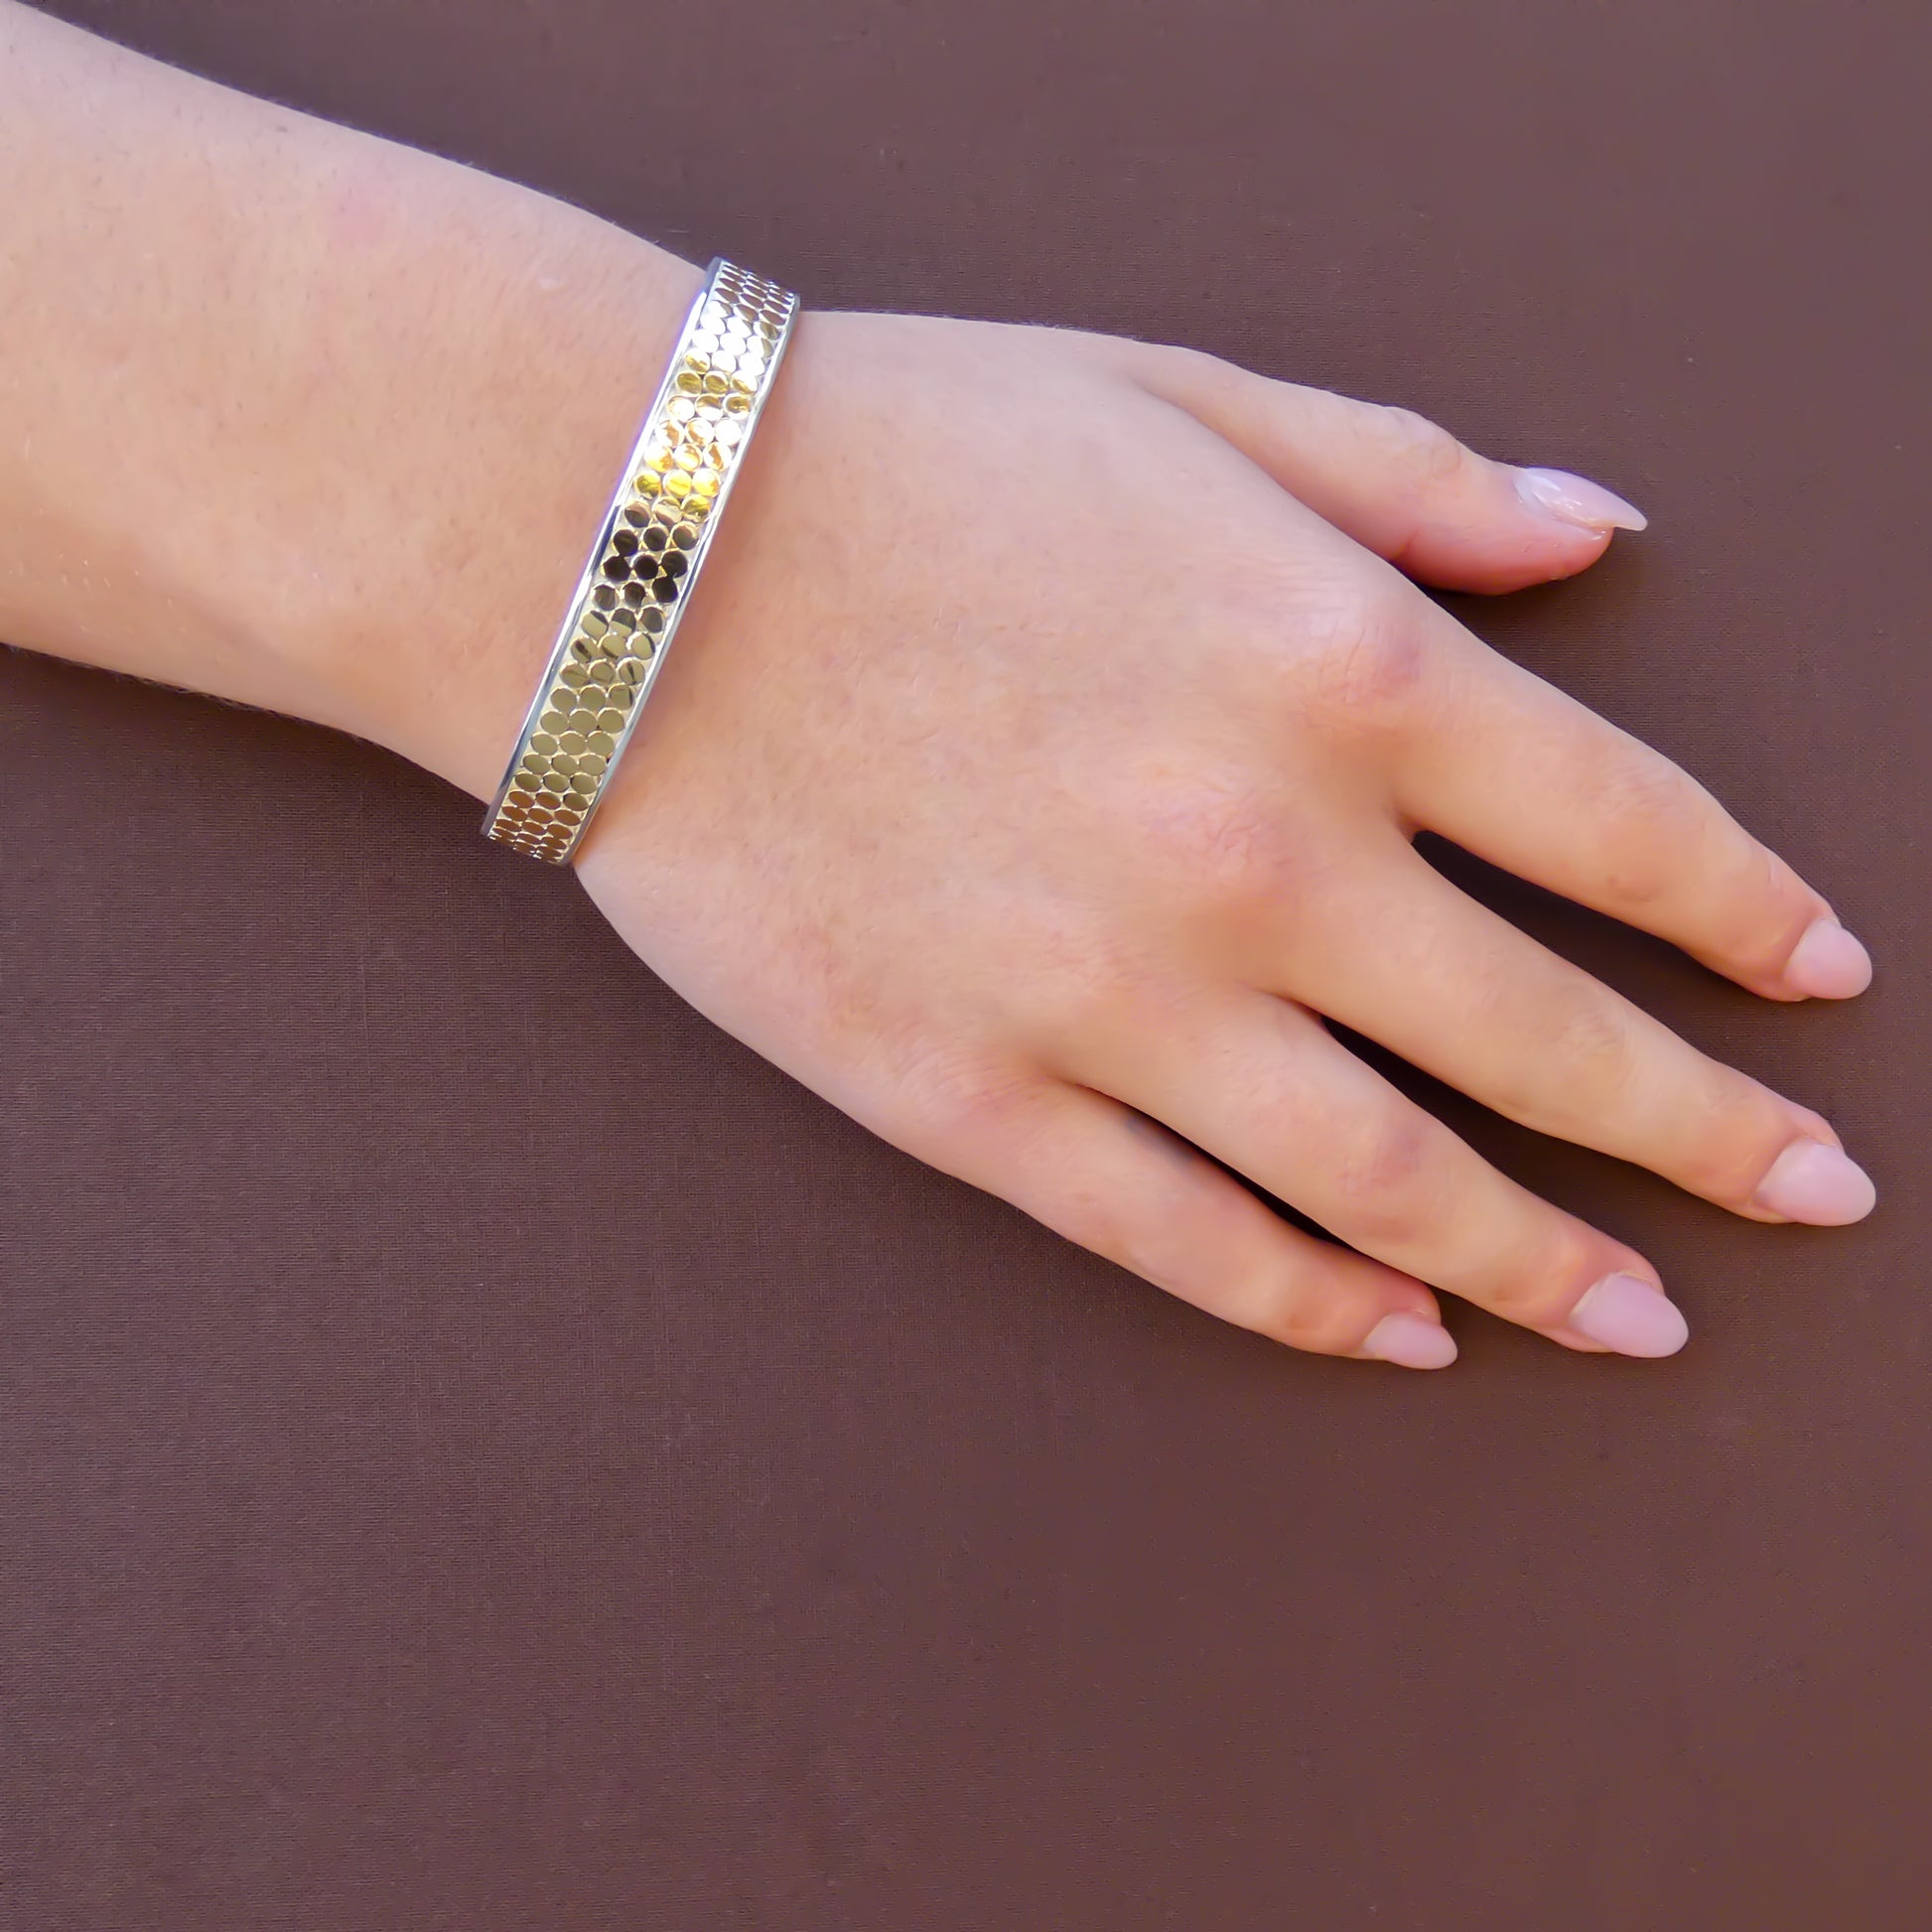 Woman wearing a silver and gold cuff bracelet with three rows of flat dots.